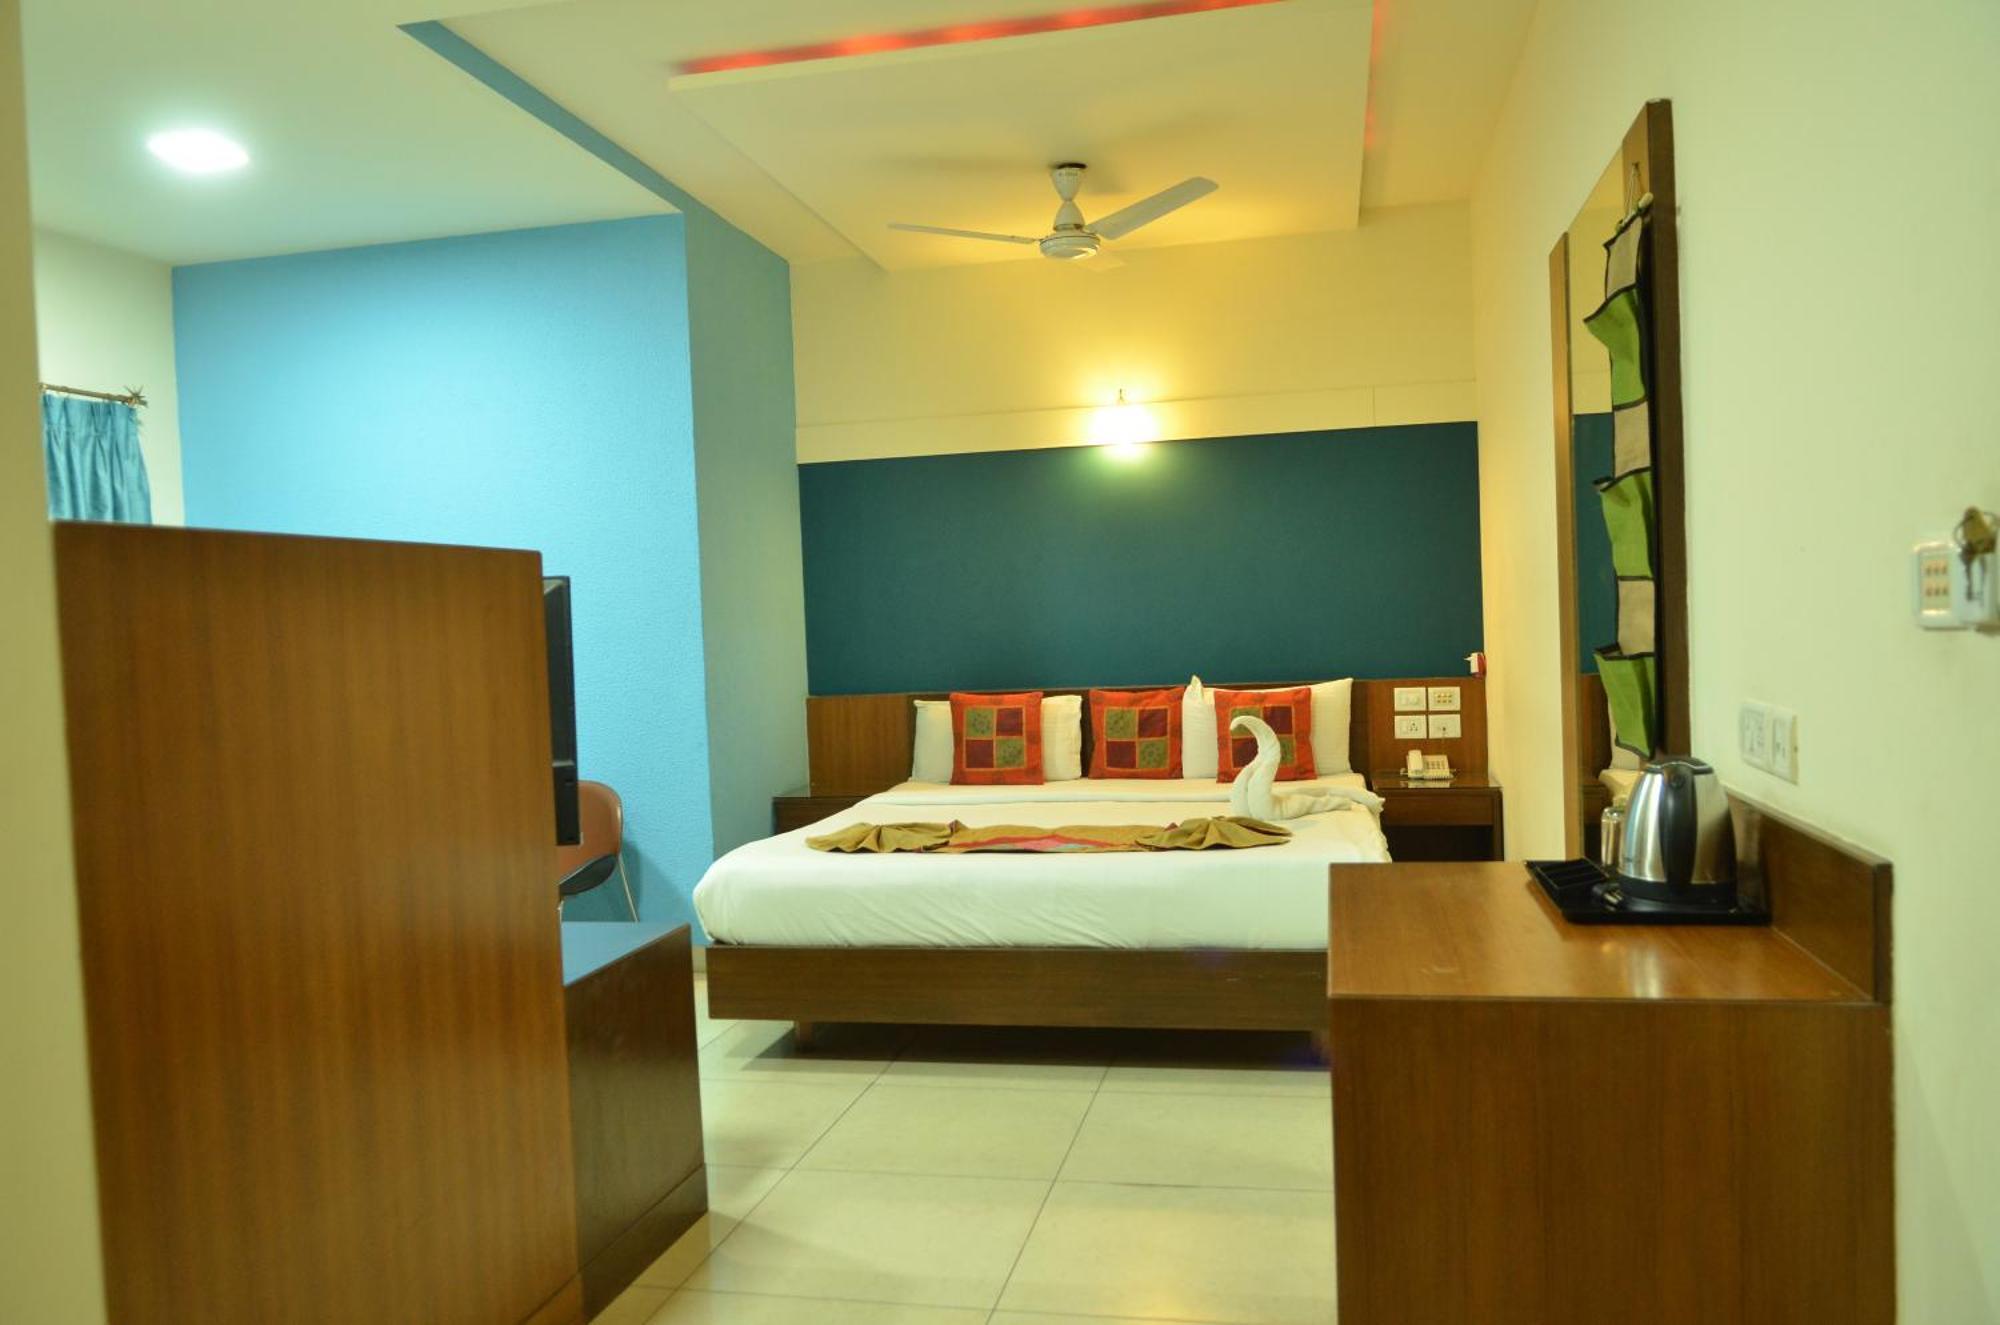 Cubbon Suites - 10 Minute Walk To Mg Road, Mg Road Metro And Church Street บังกาลอร์ ภายนอก รูปภาพ